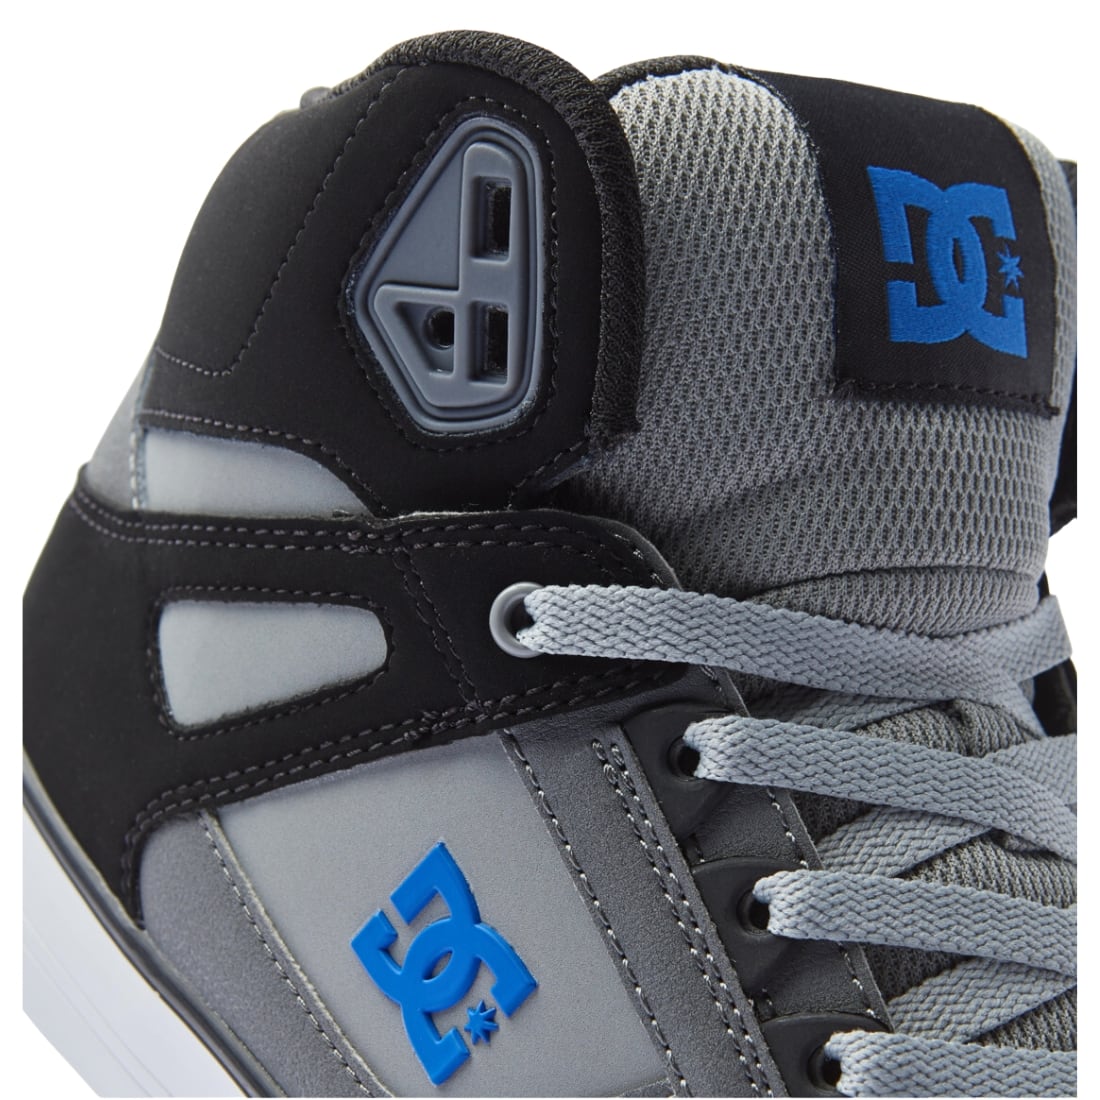 DC Pure High Top WC Shoes - Black/Grey/Blue